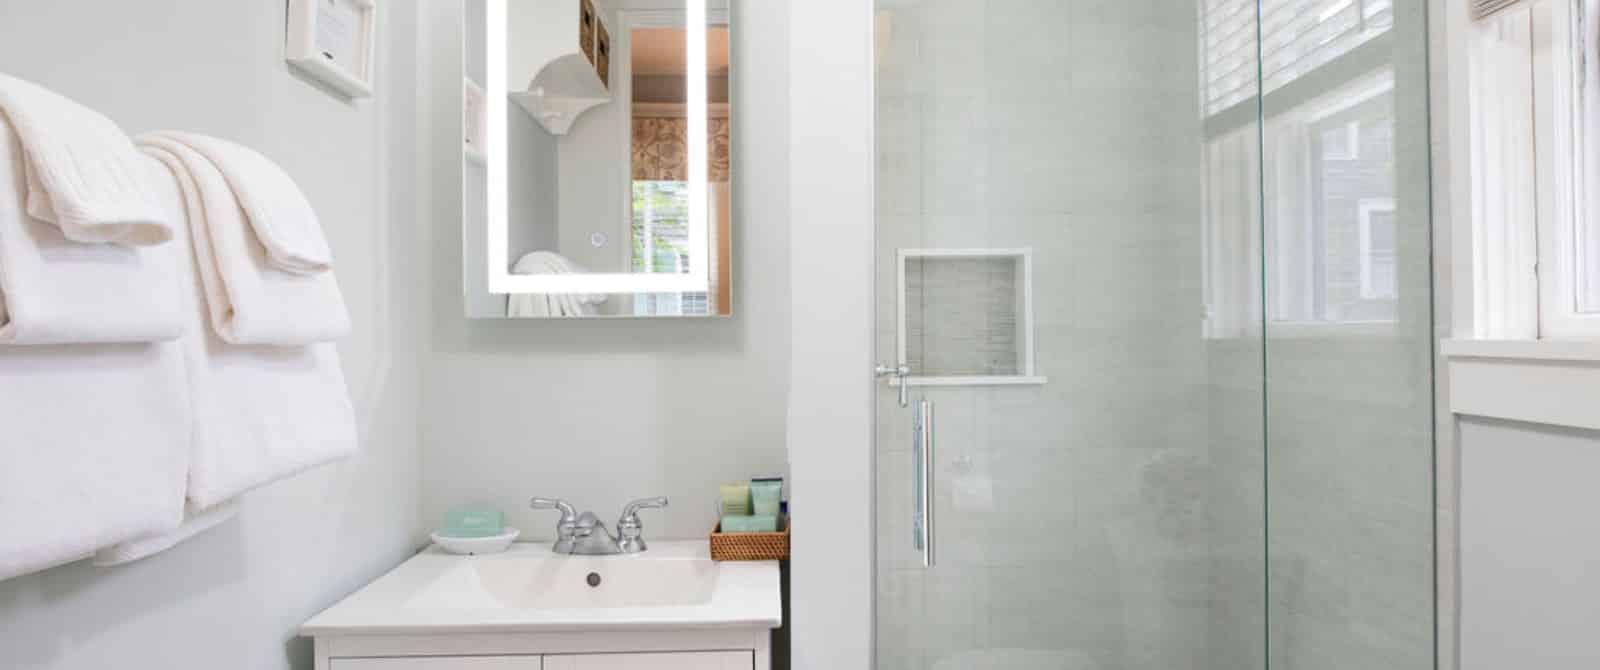 Bathroom with white walls, white vanity, rectangular mirror, and stand up shower